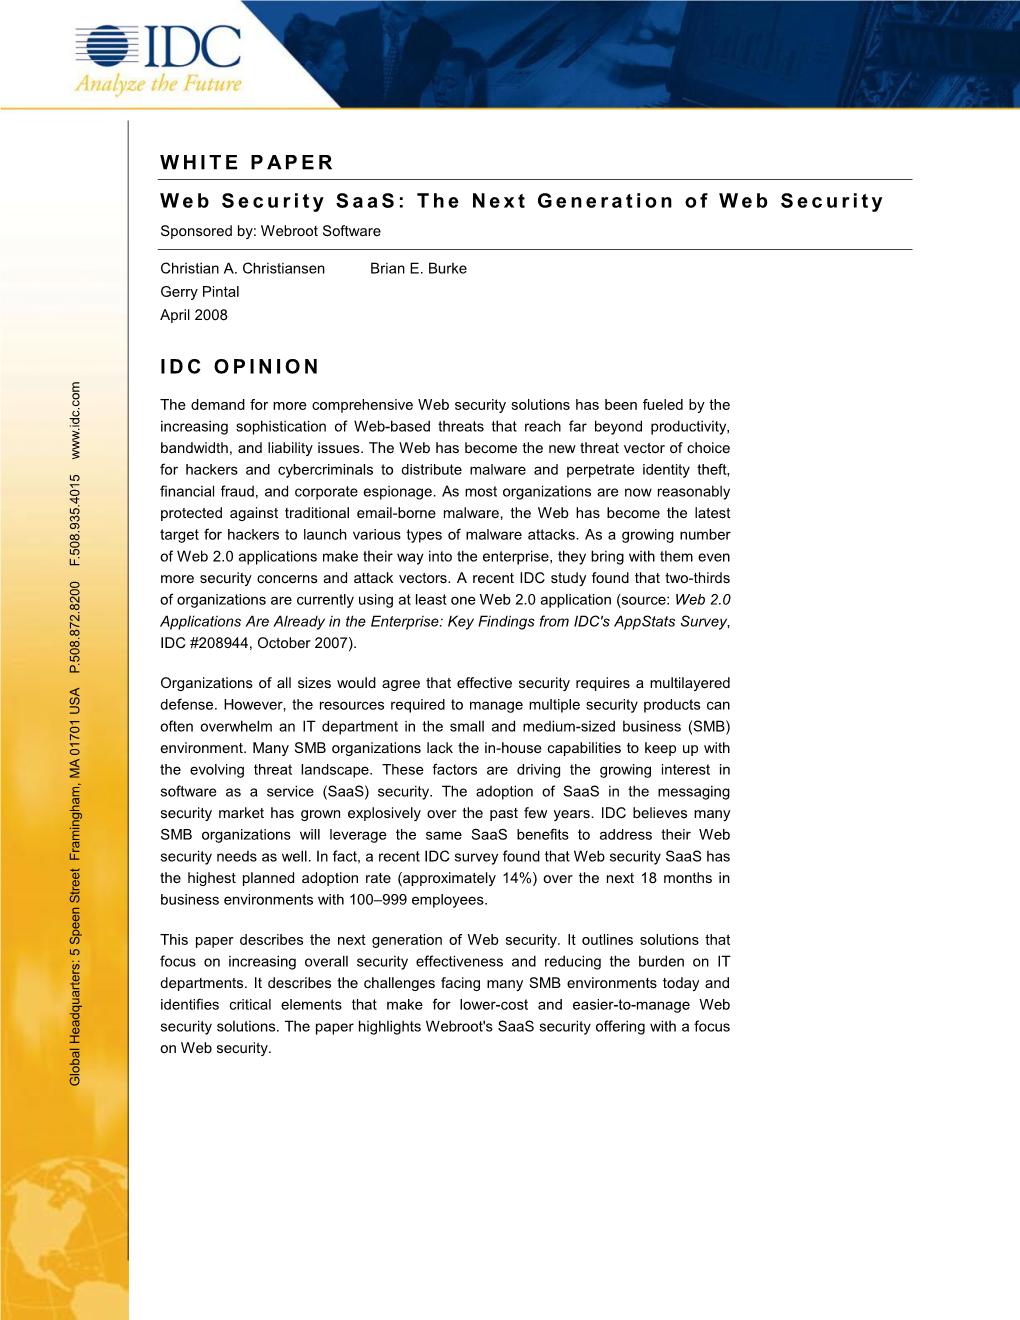 The Next Generation of Web Security IDC OPINION